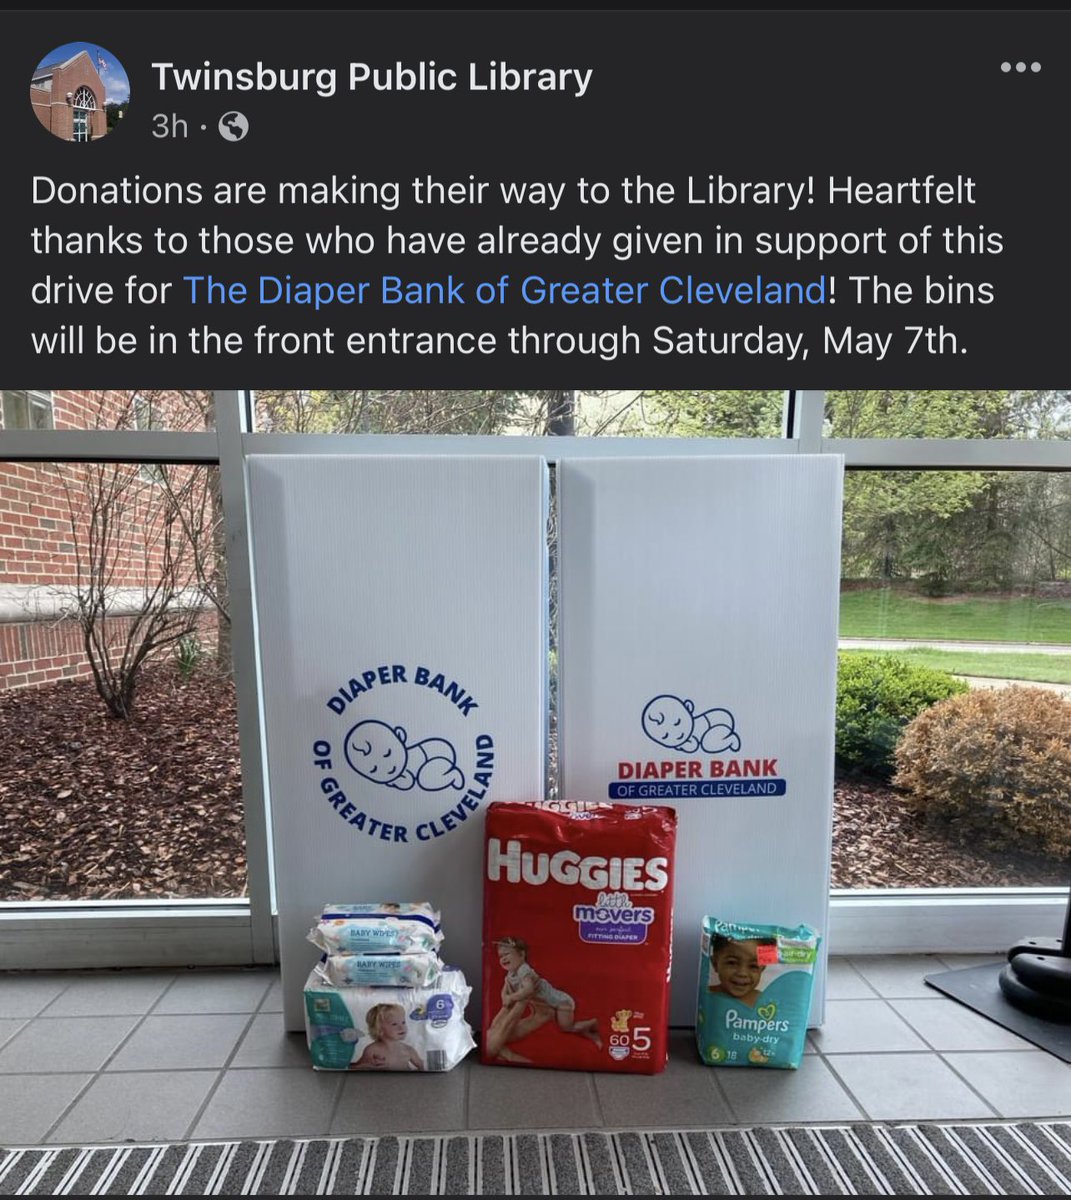 We are truly thankful for our supporters!

#diaperbankcle #enddiaperneed #diapers #nonprofits #philanthropy #donate #community #volunteer #educate #support #makeadifference